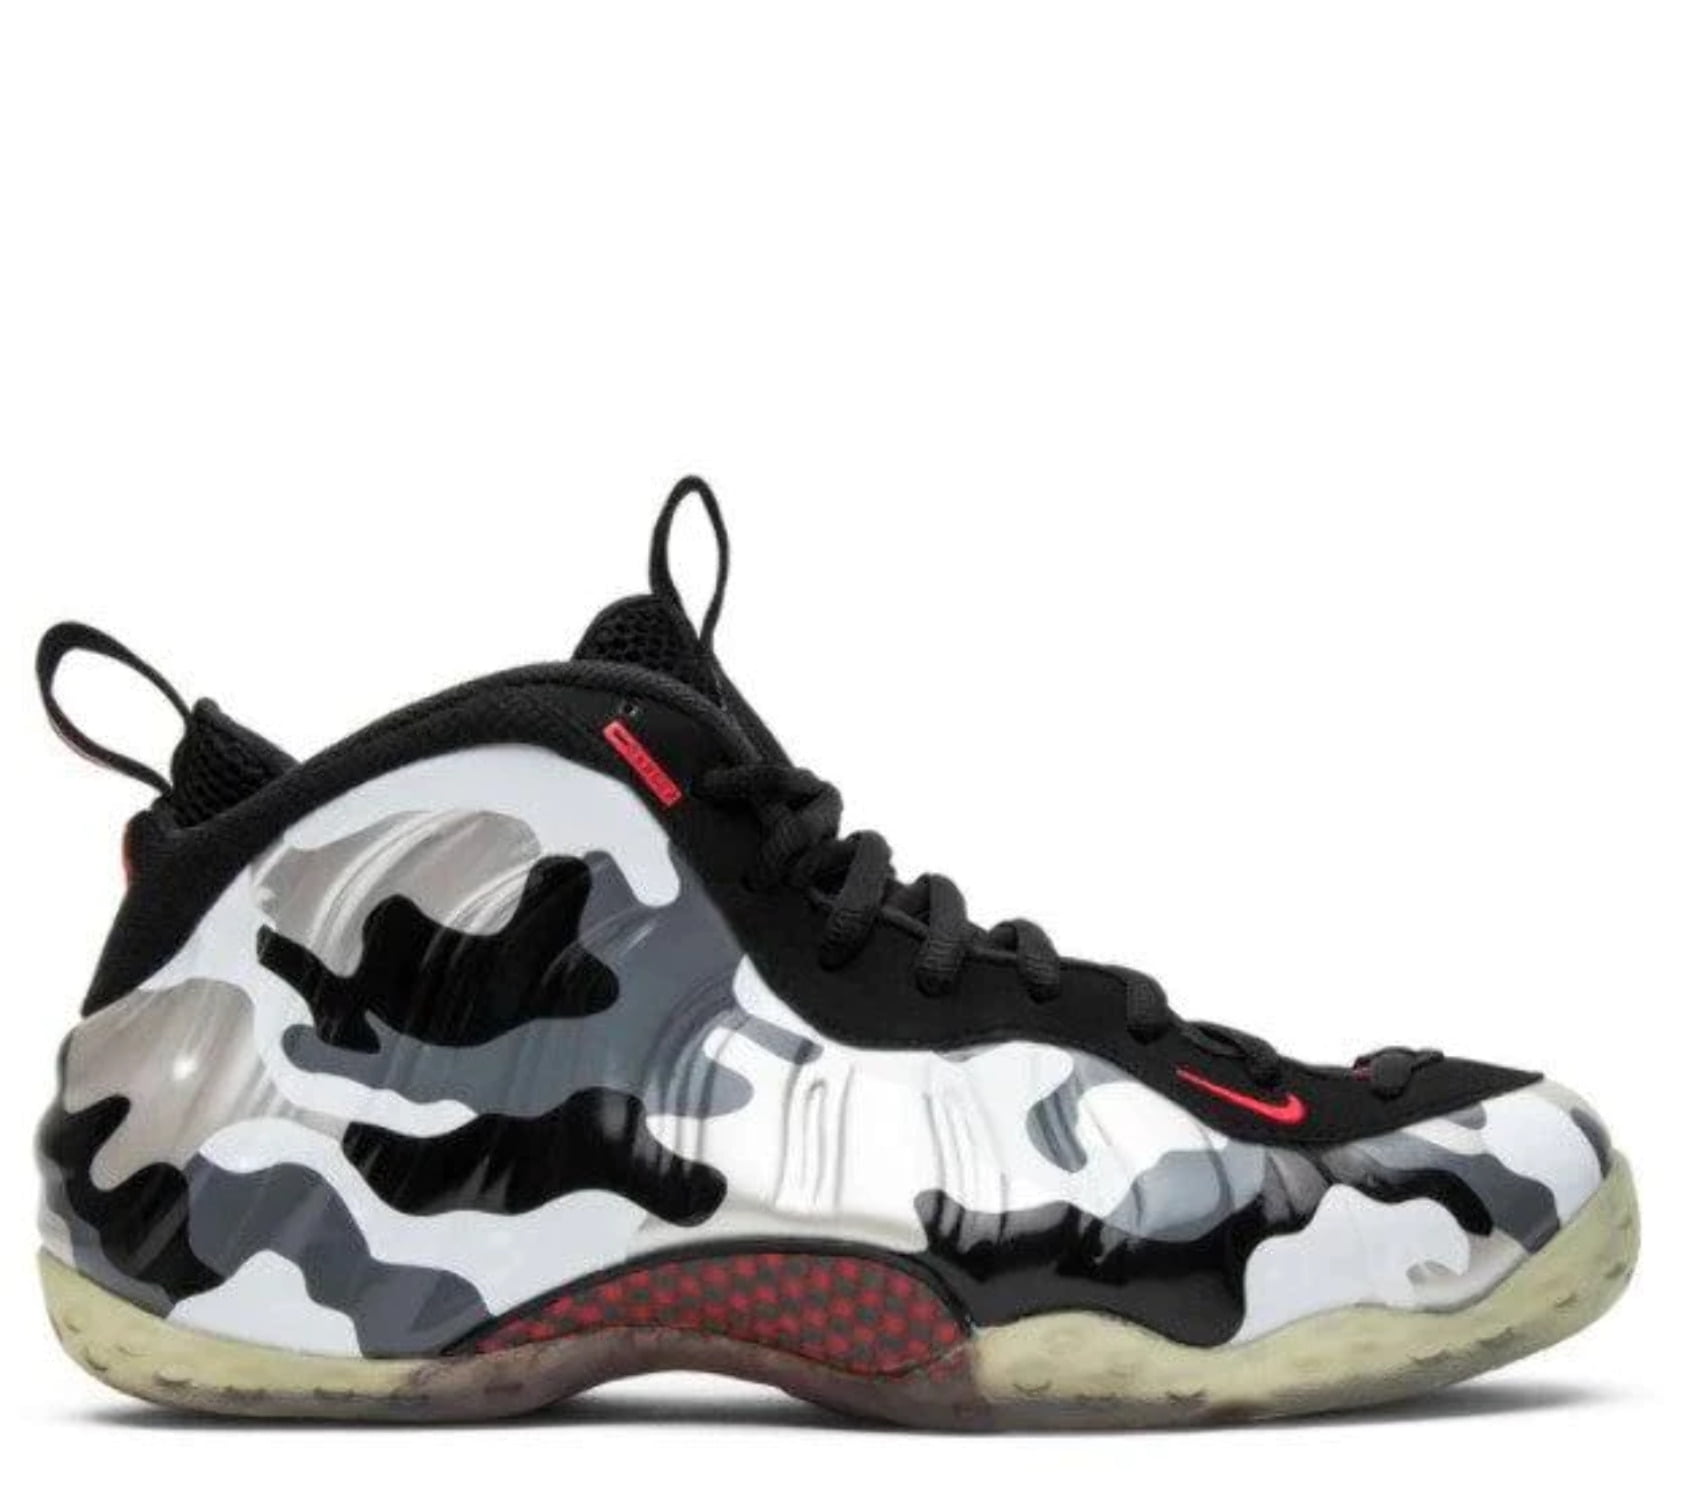 Nike Air Foamposite One PRM 'Fighter Jet